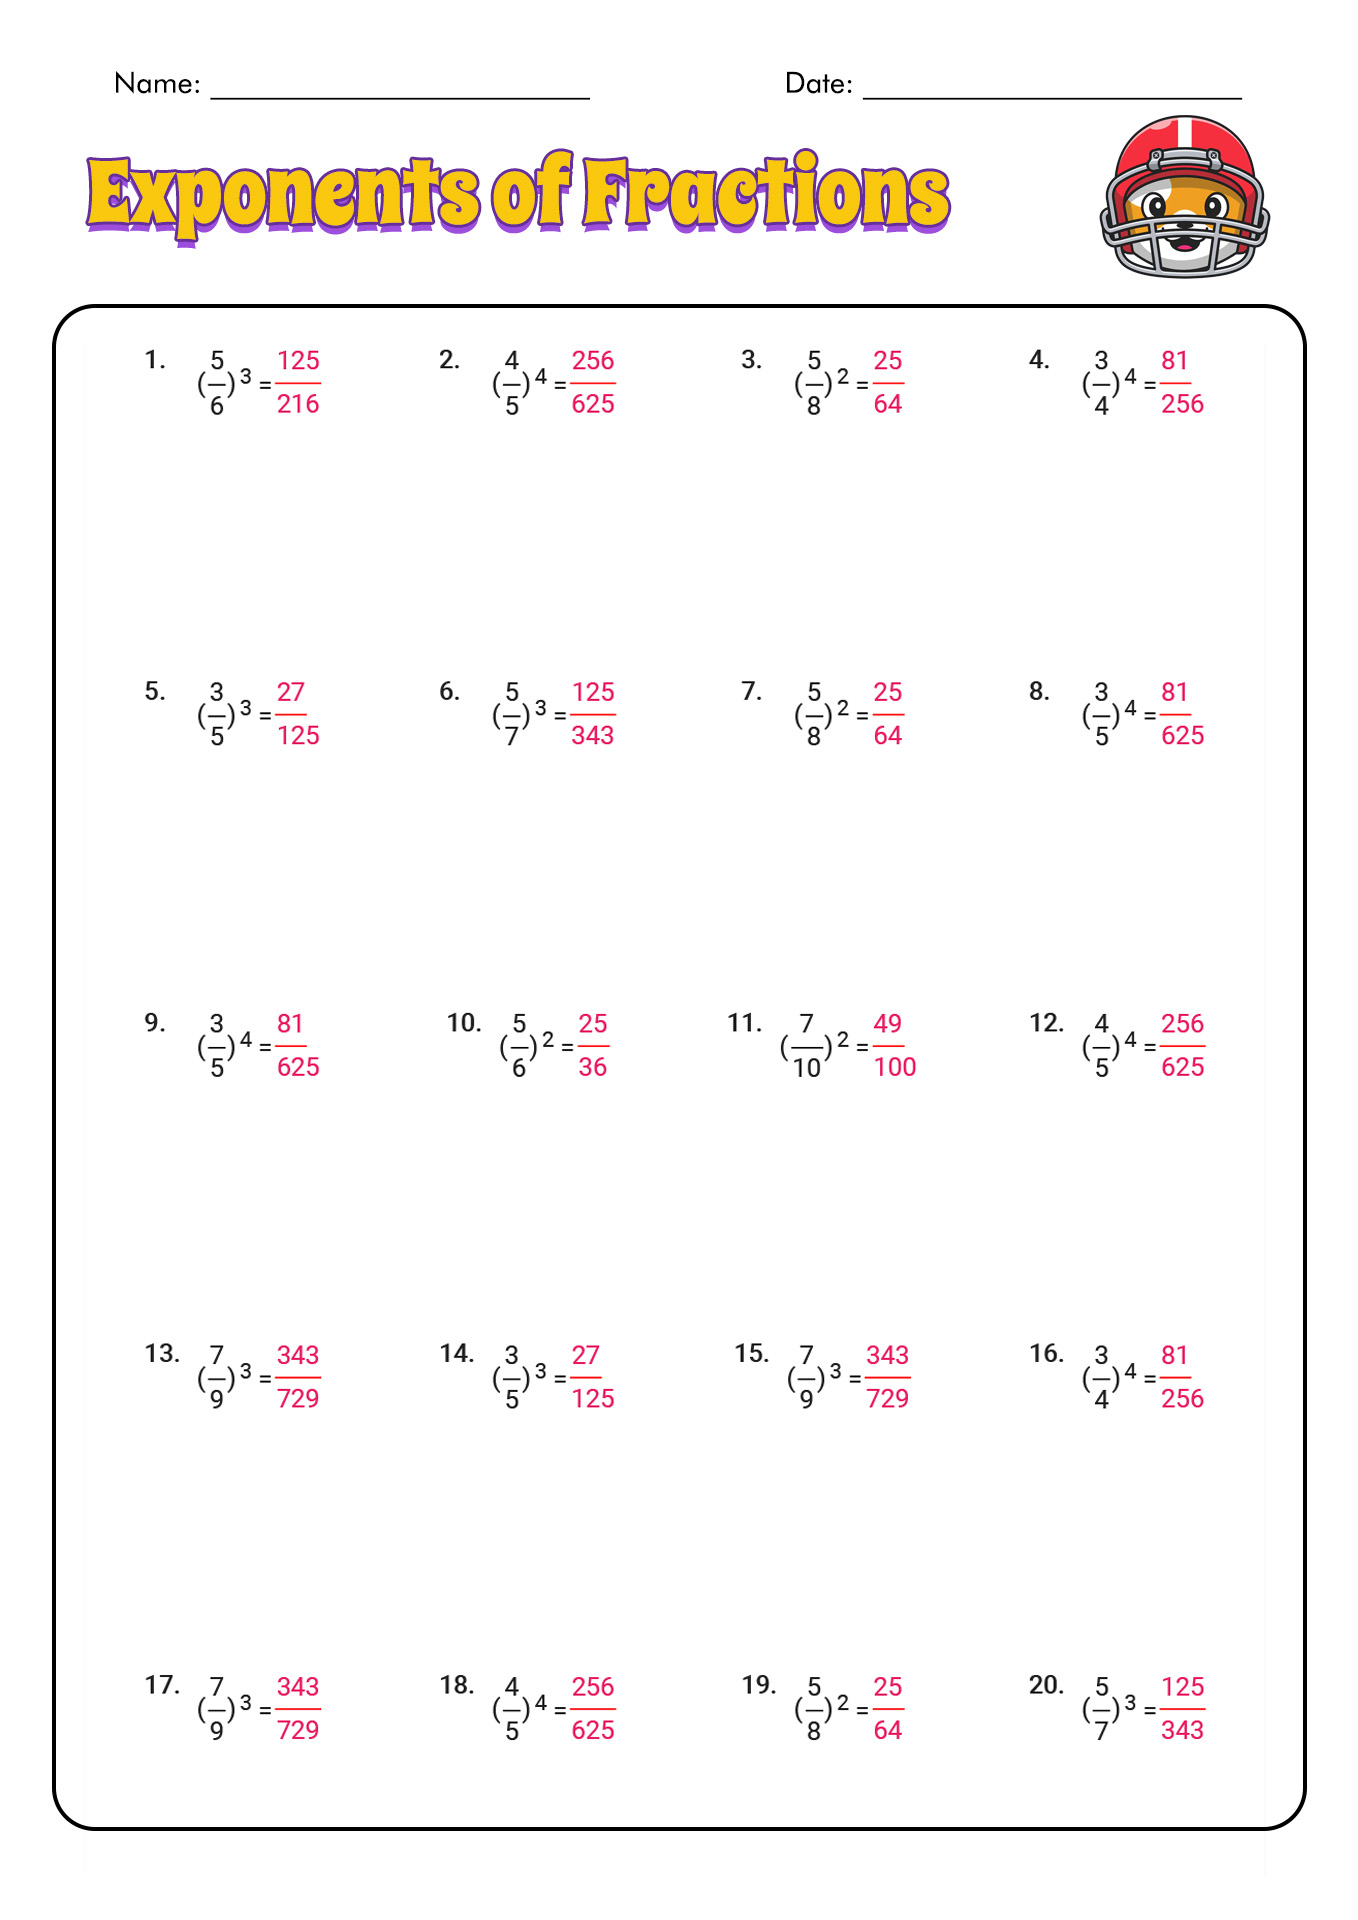 Fractional Exponents Worksheets